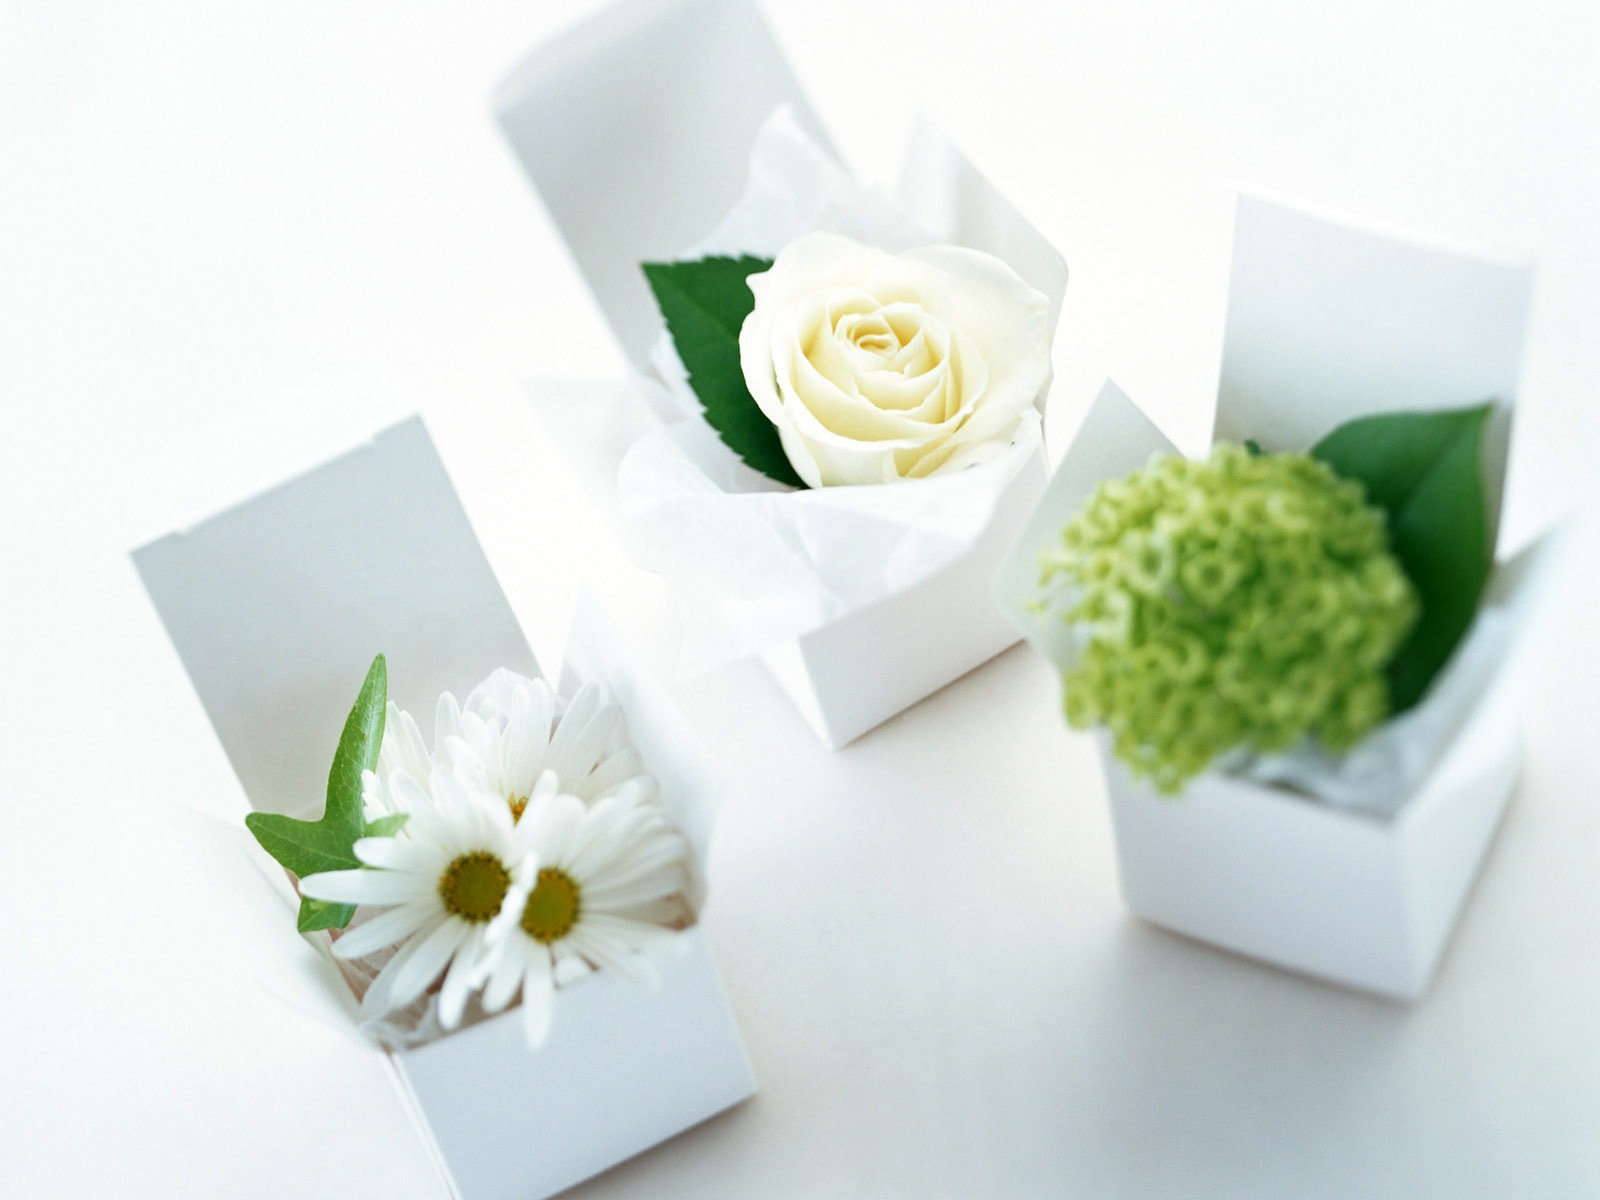 Flowers and gifts wallpaper (1) #16 - 1600x1200